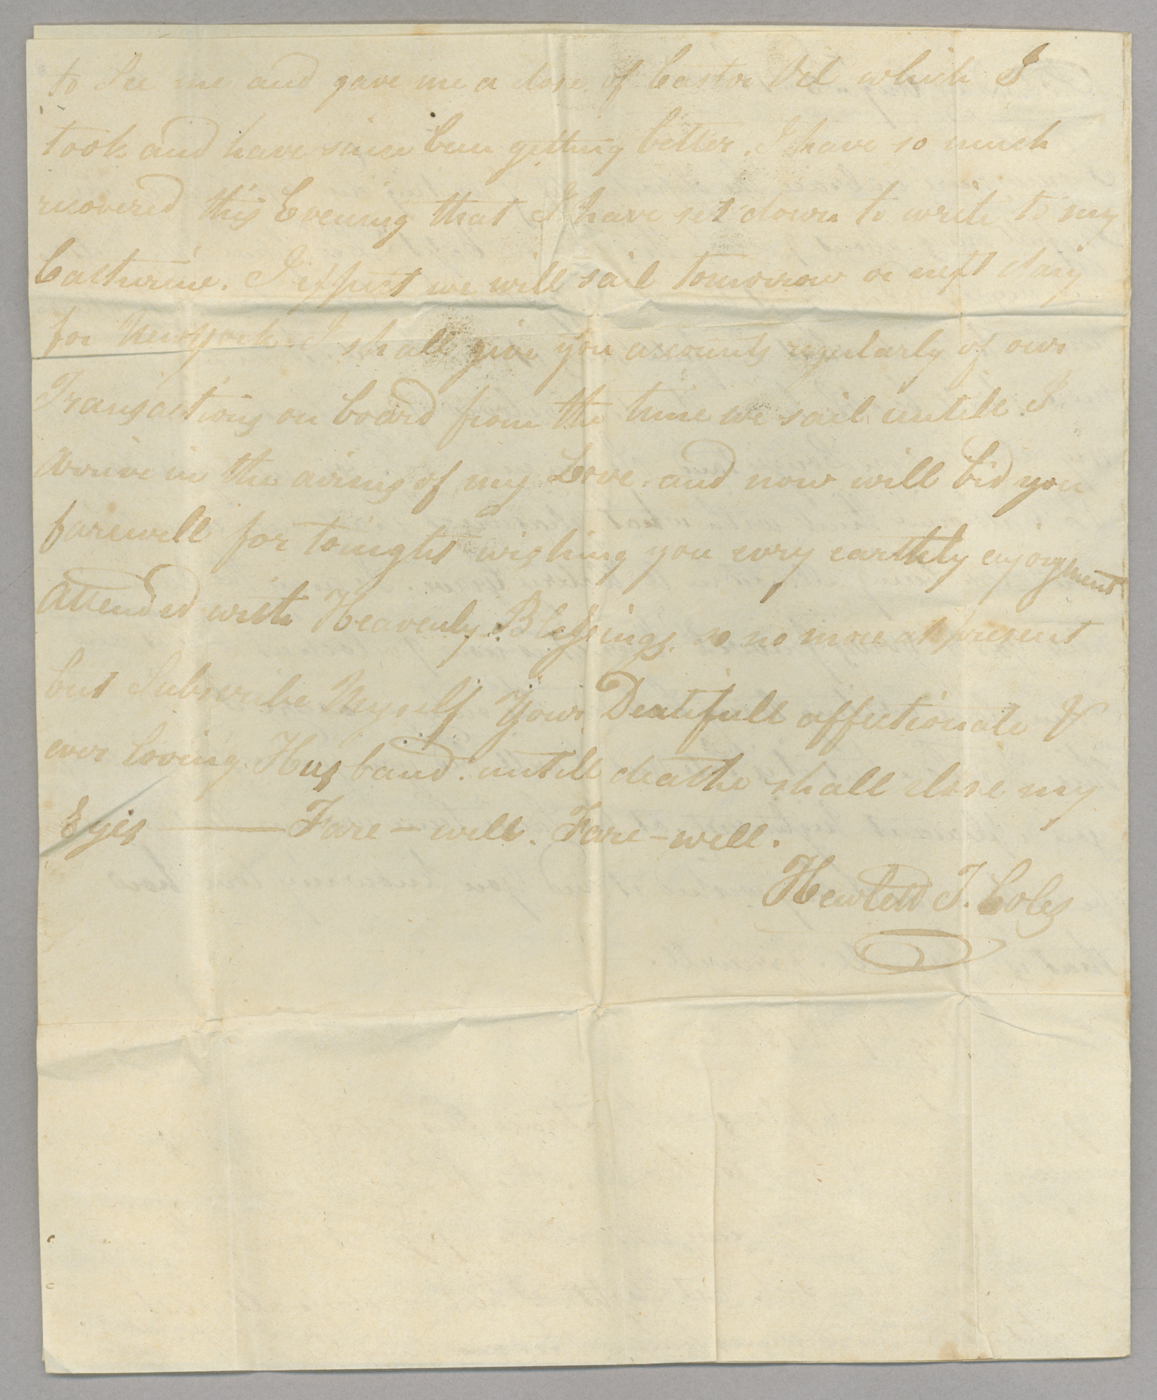 Letter, Hewlett T[ownsend] Coles, St. John's, Newfoundland, to "My Dear Catherine," [Catherine Van Suydam Coles], n.p., Page 4